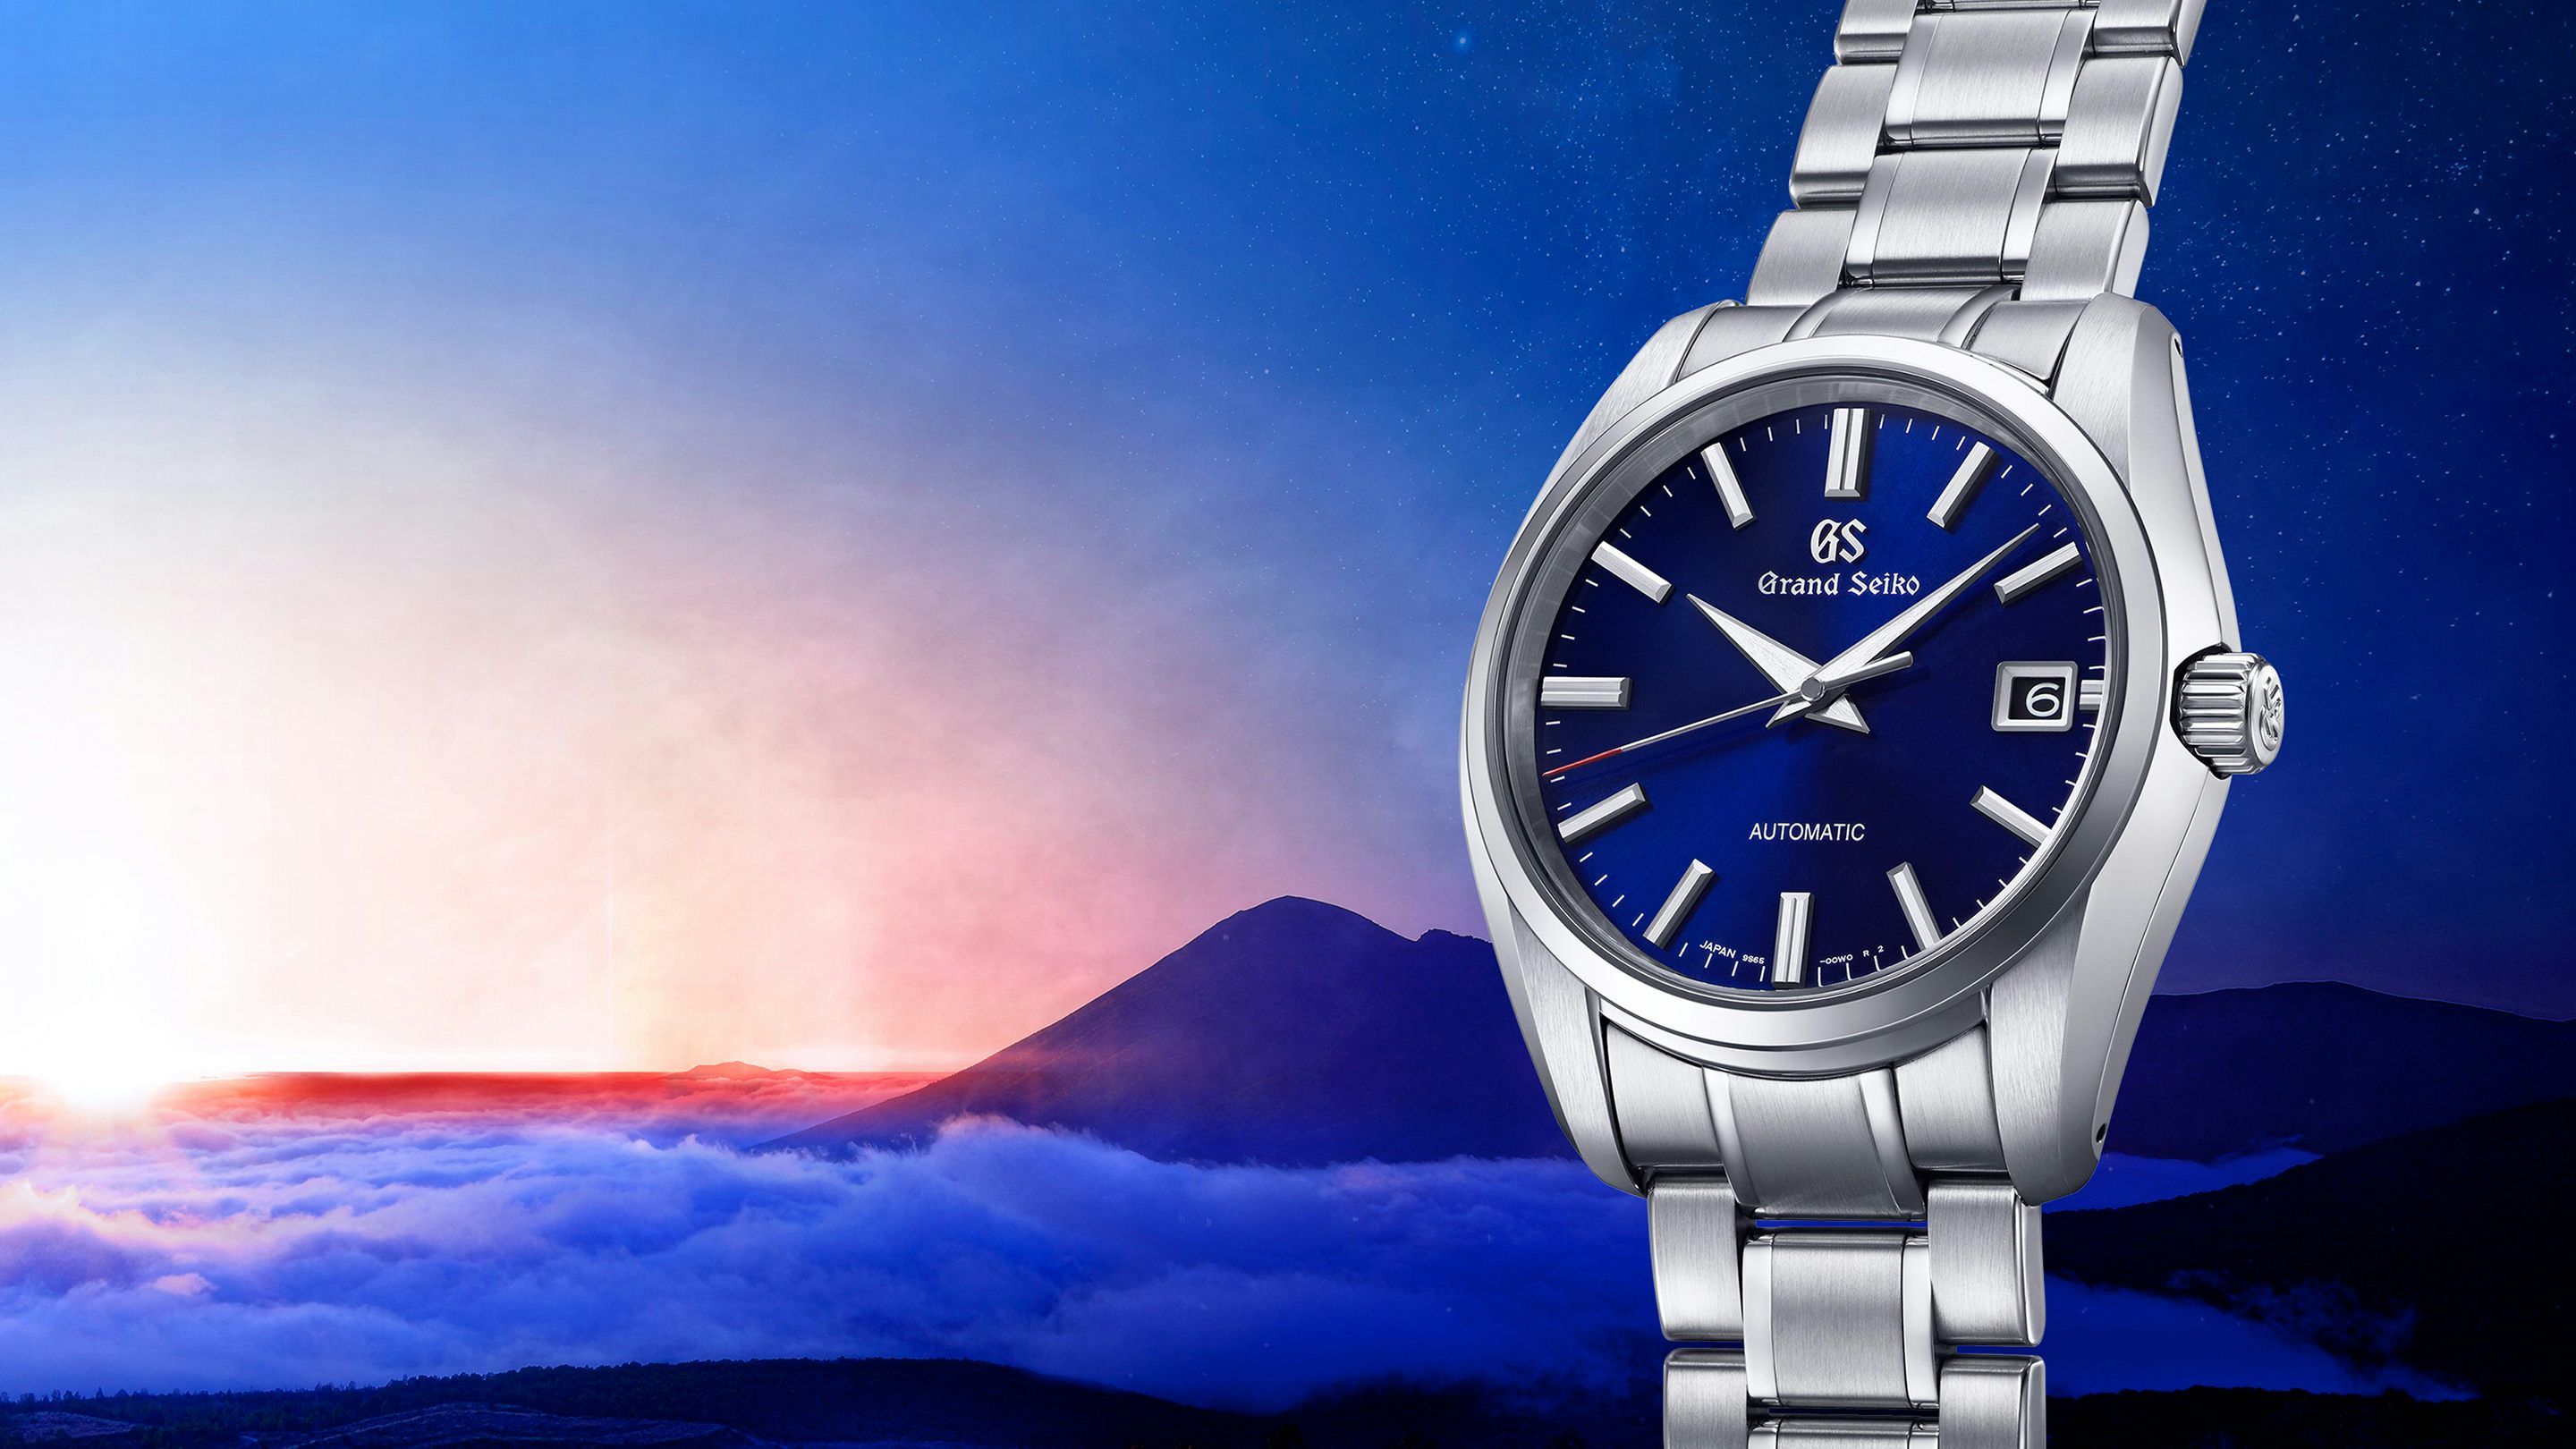 Introducing: The Grand Seiko 60th Anniversary Limited Edition Ref. SBGR321  - Hodinkee